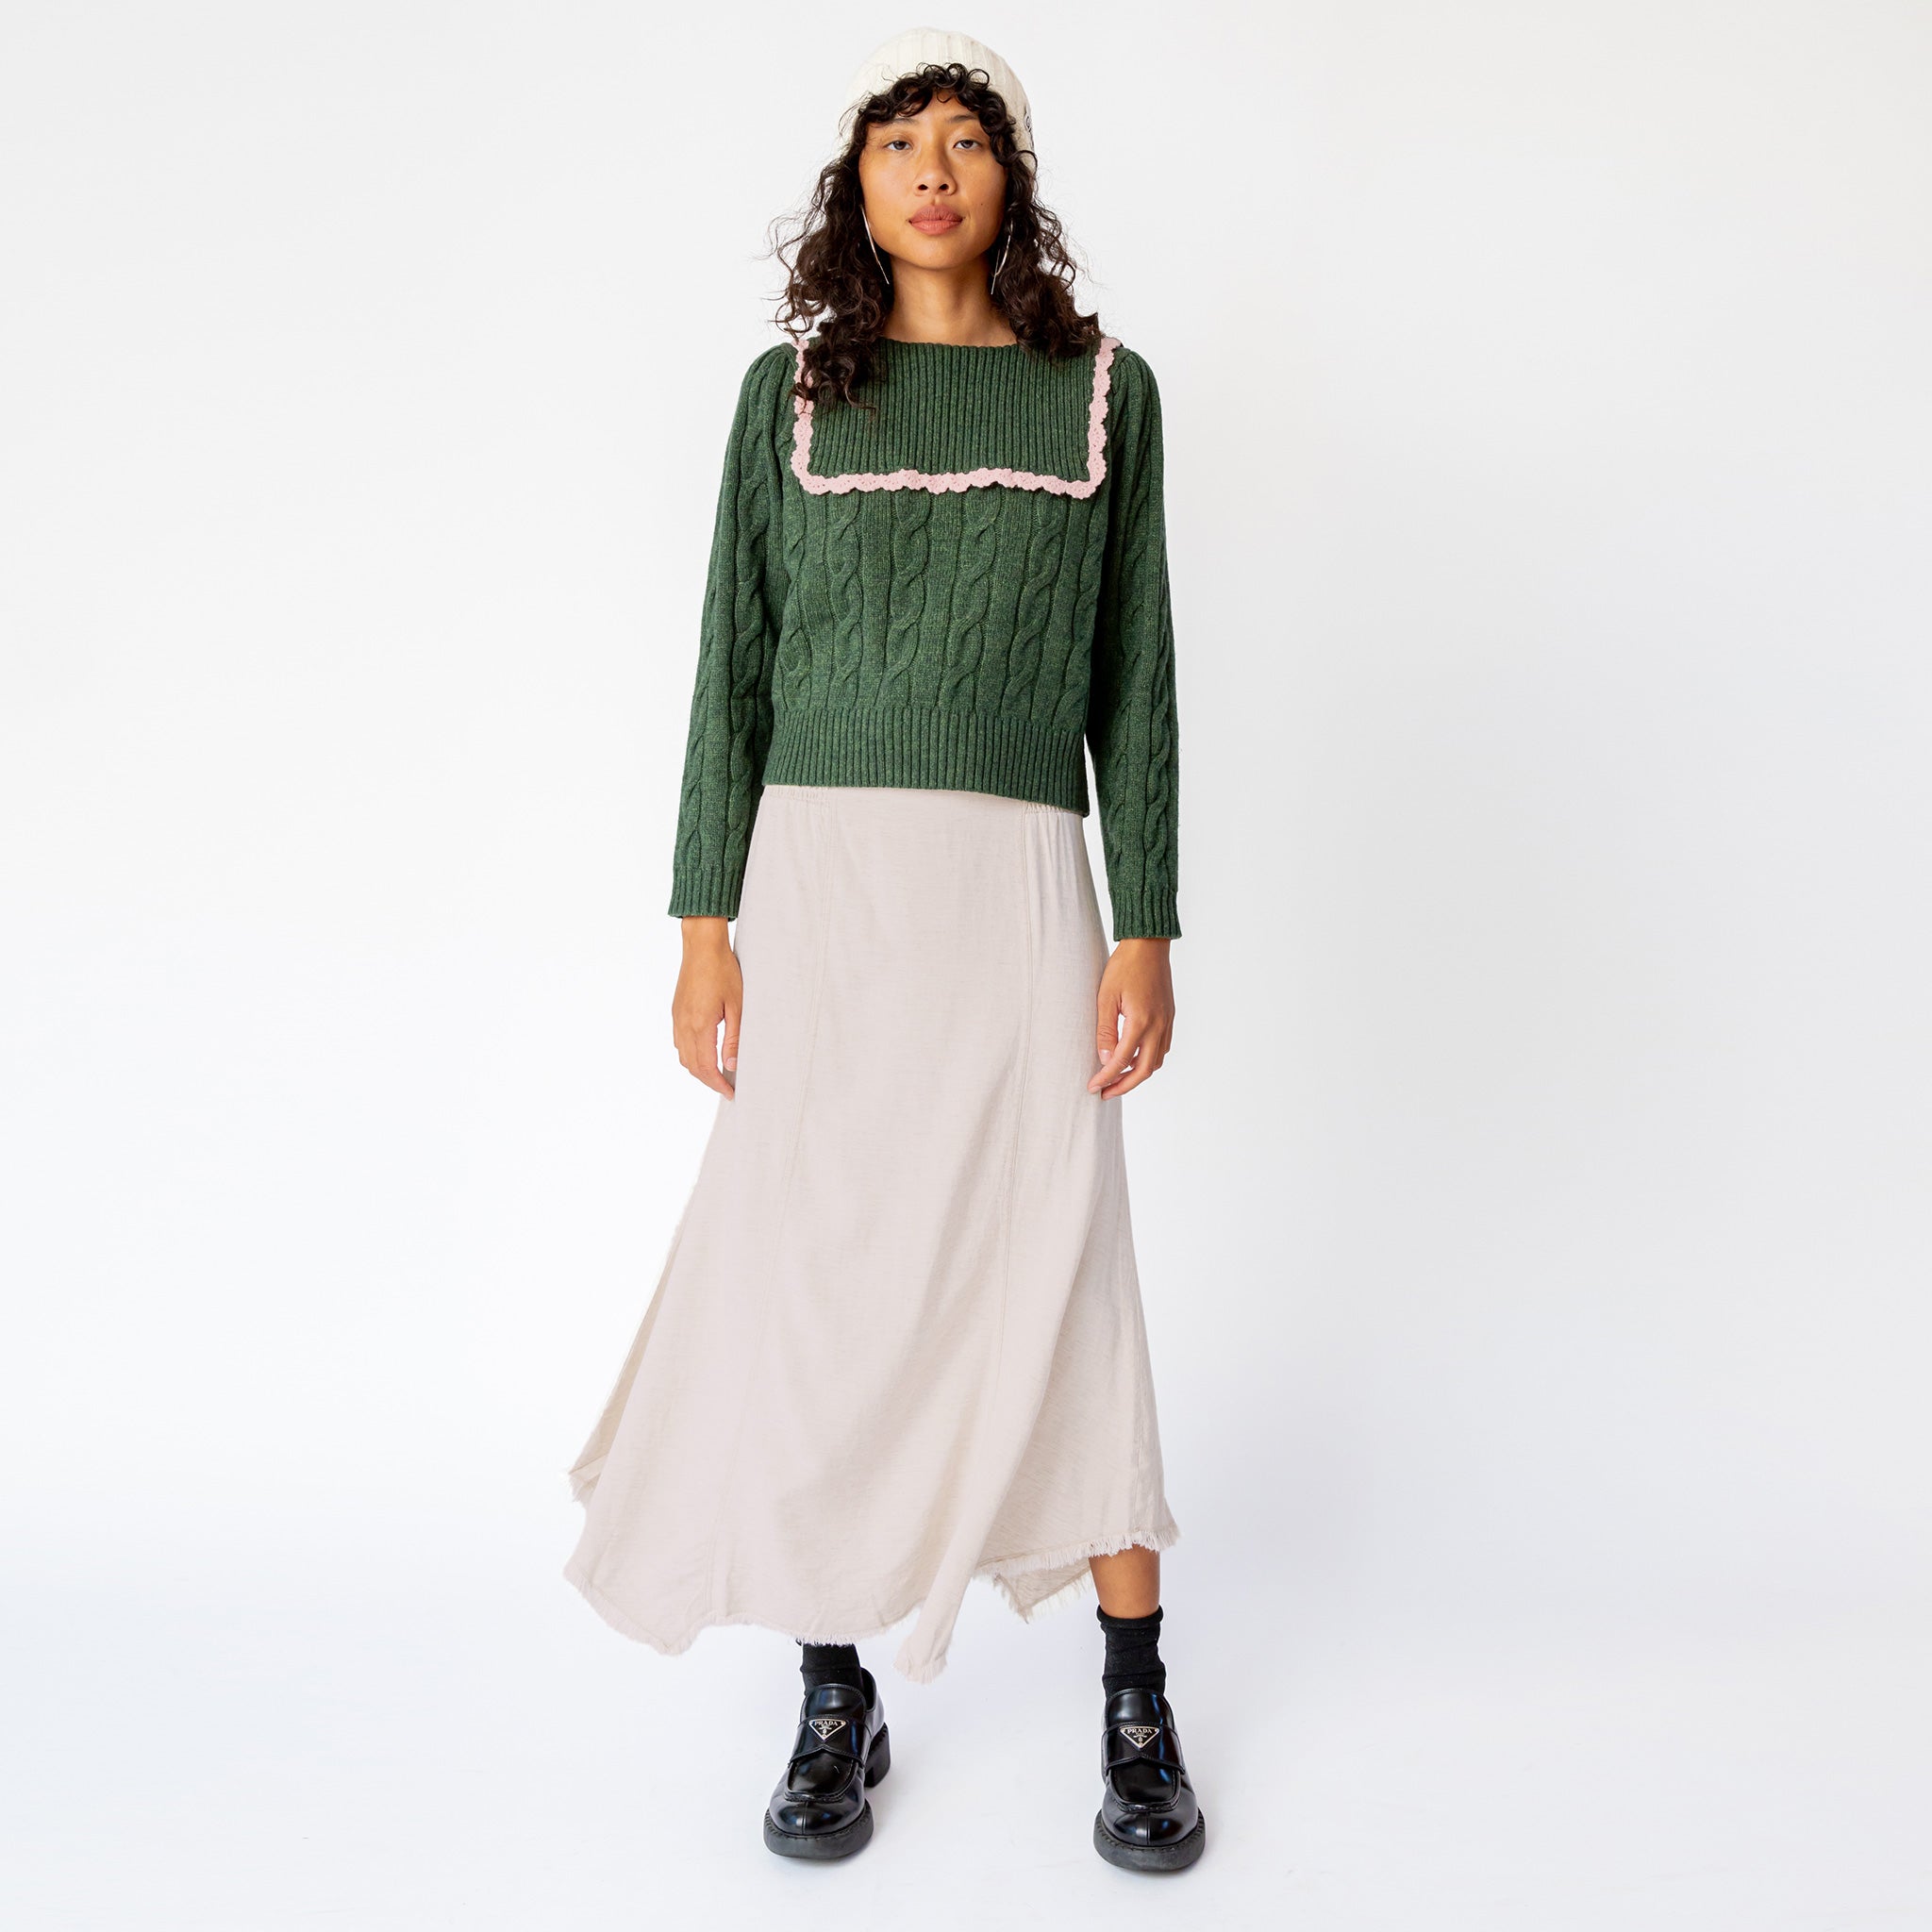 A model wears Misc Etc's smocked linen midi skirt in sand, featuring a smocked elastic waistband with drawstring and an asymmetrical hem, paired here with a green cable knit sweater and black loafers.